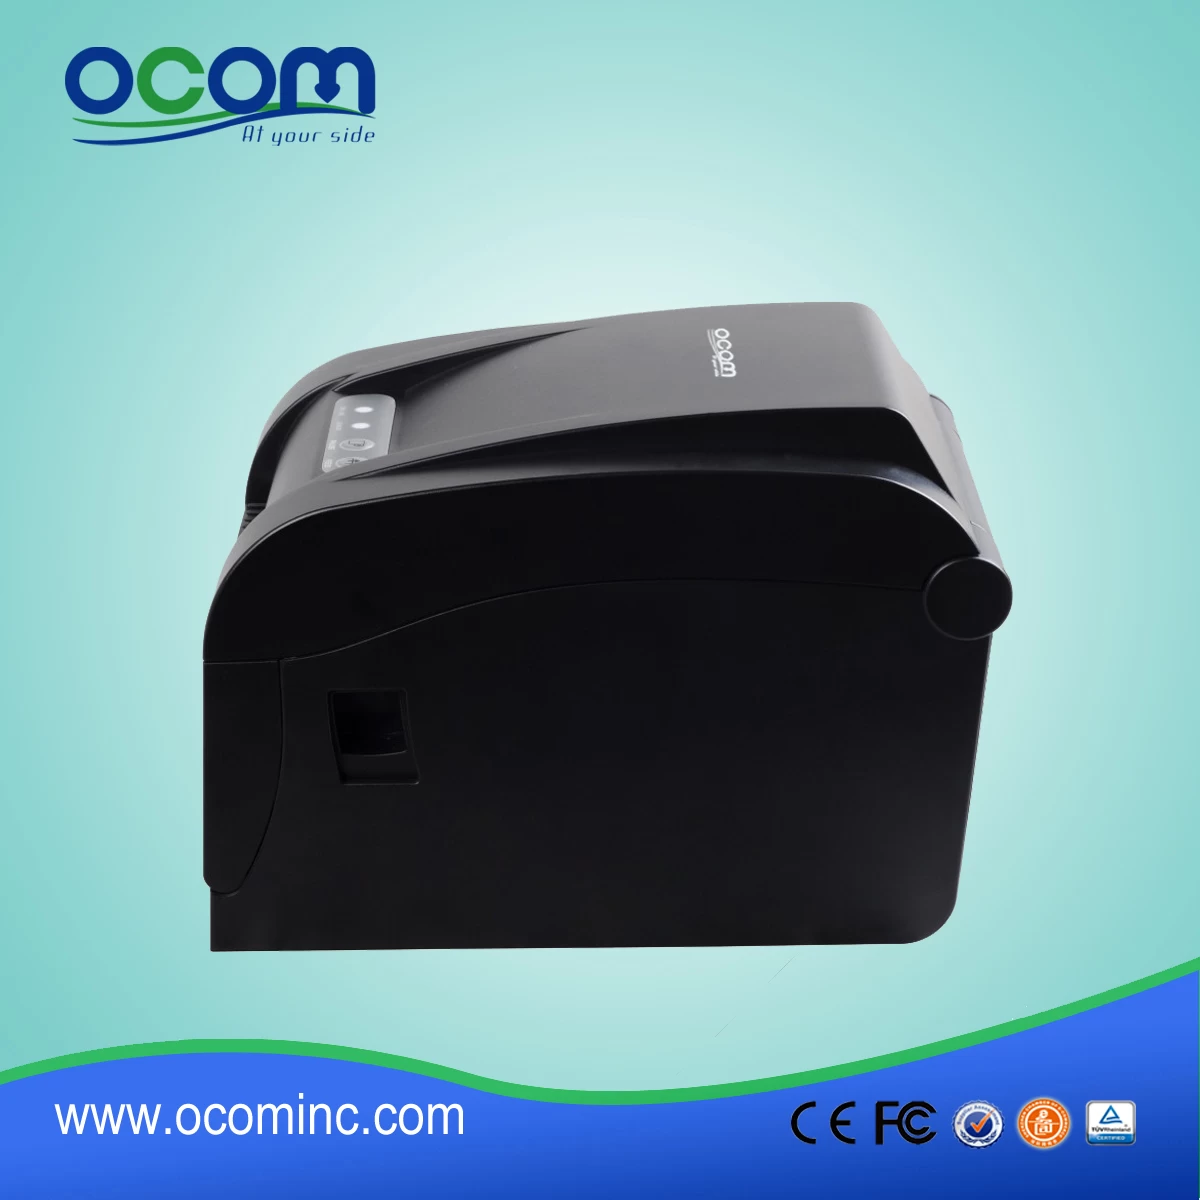 High Quality Thermal Barcode Label Printers--OCBP-005